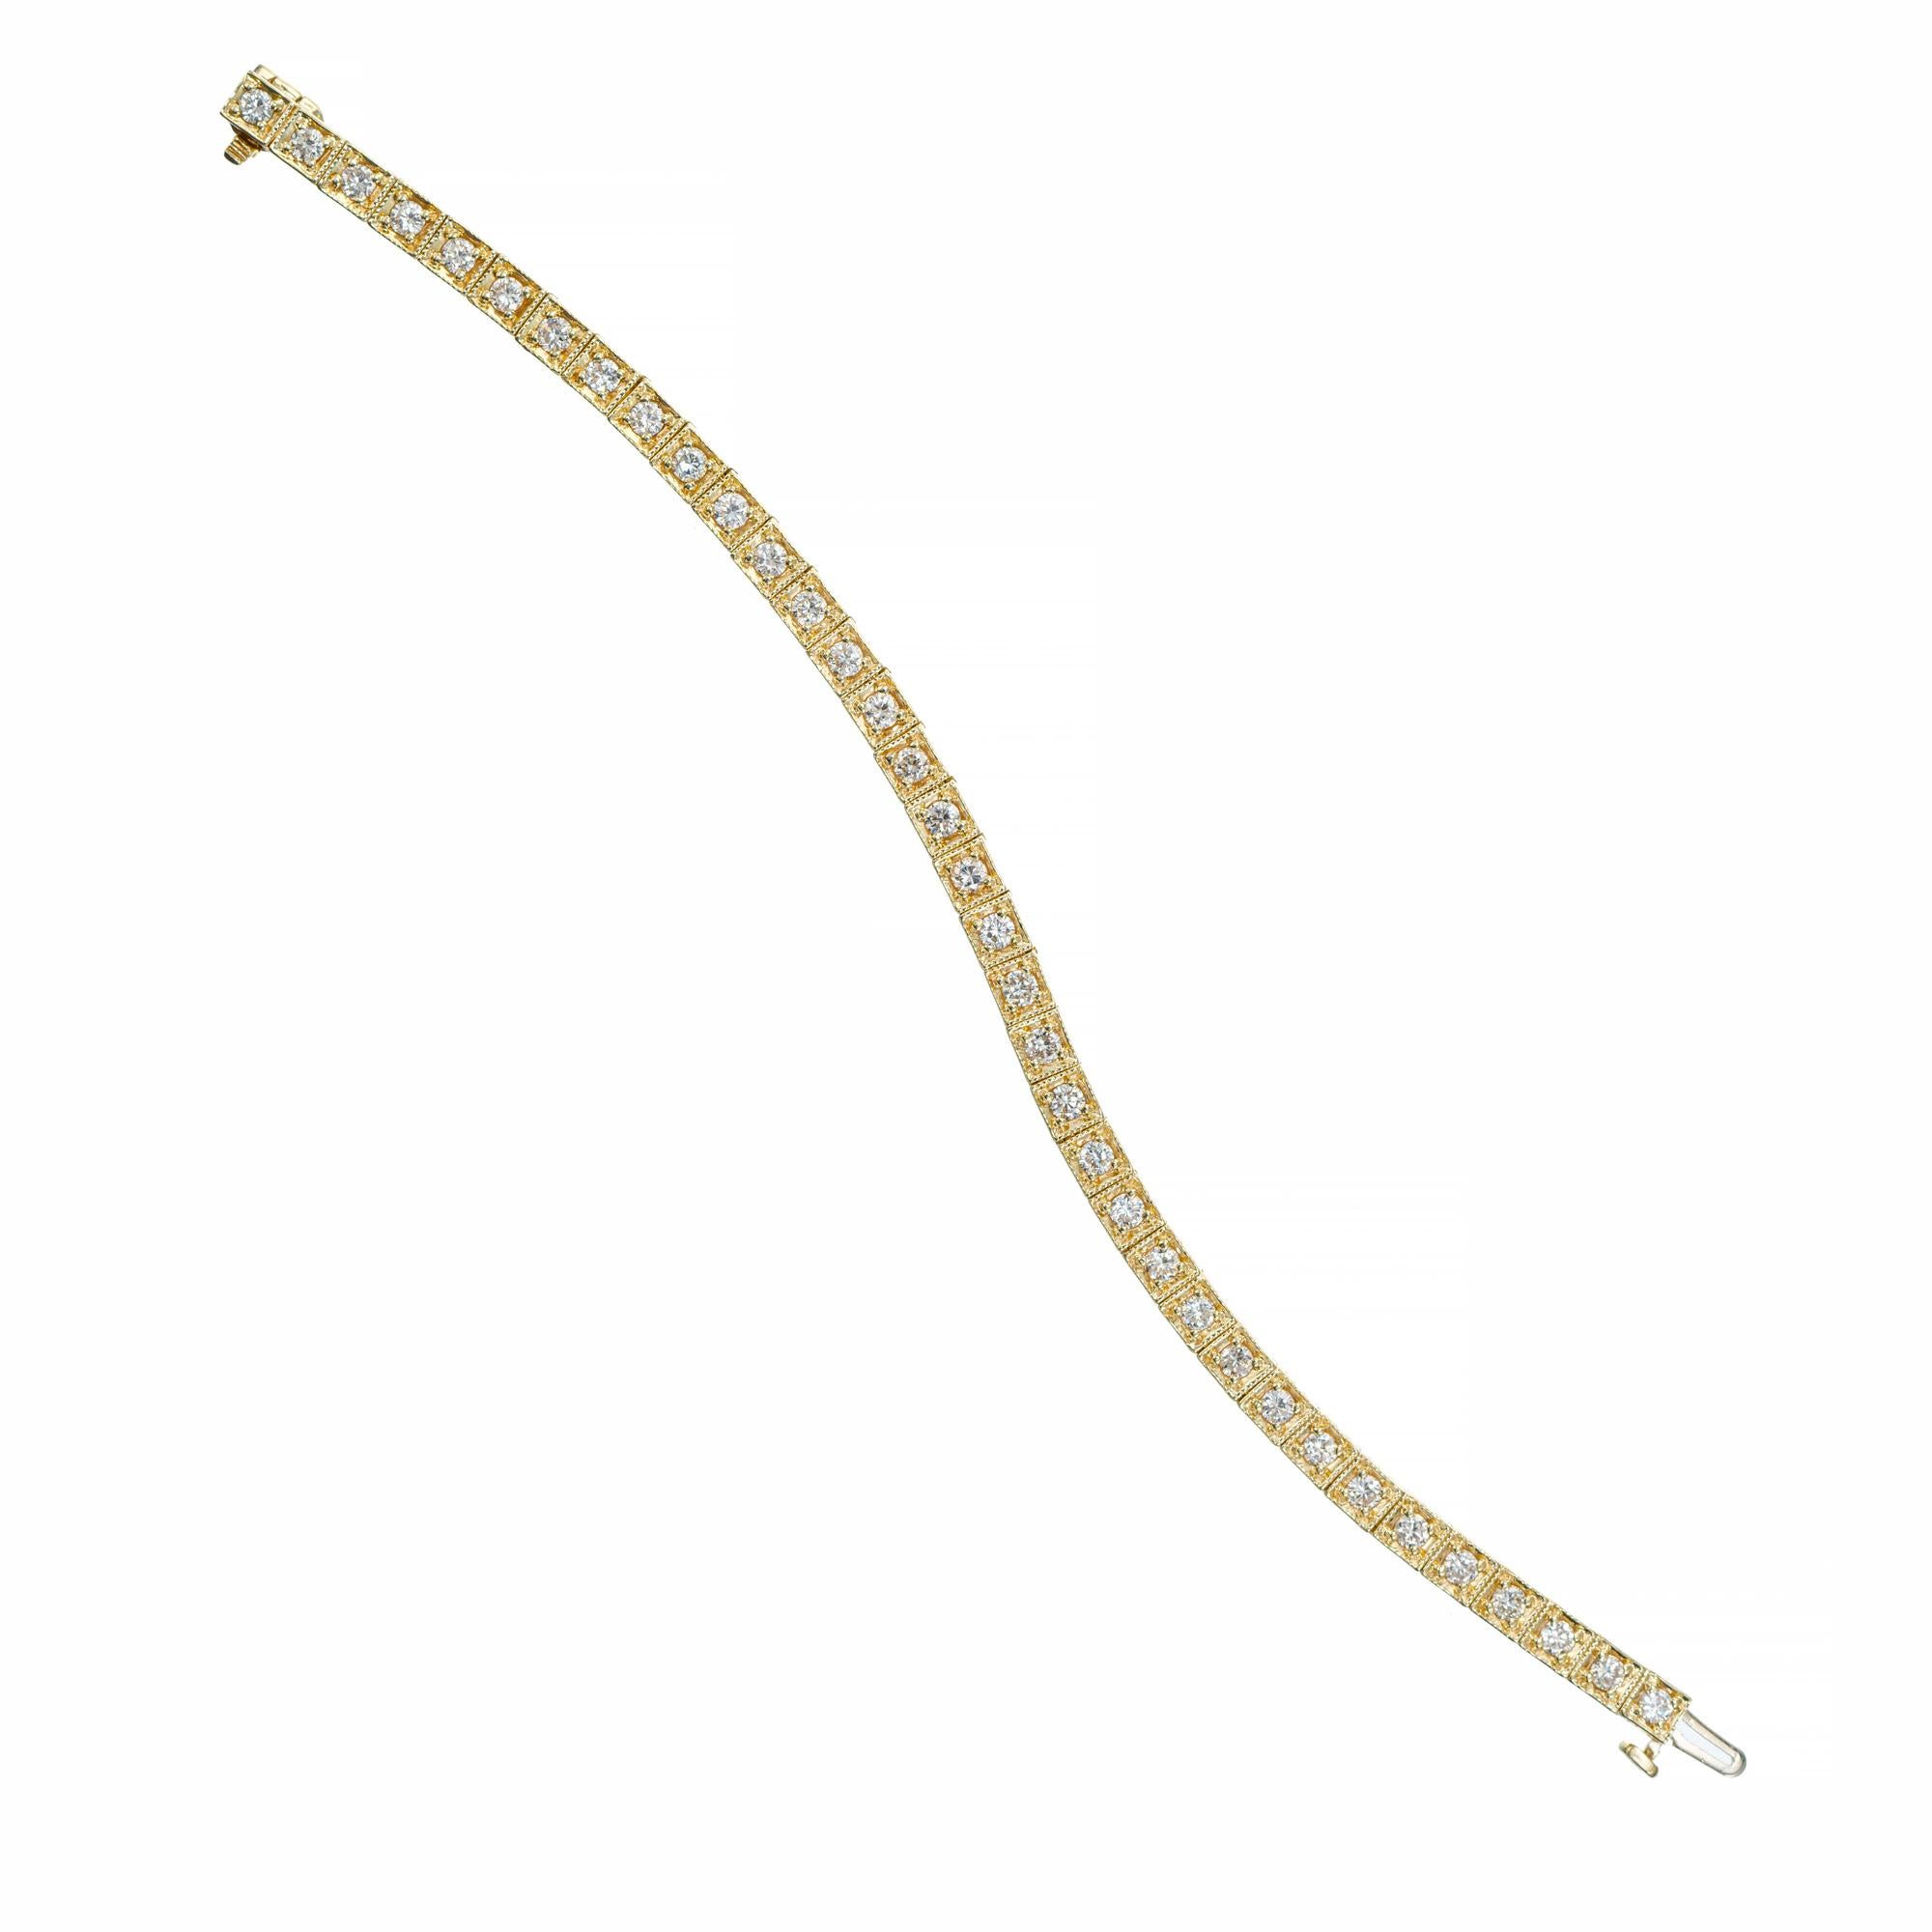 Diamond yellow gold tennis bracelet. 36 round brilliant cut diamonds totaling 3.77cts, set in a 14k yellow gold heavy hinged box link bracelet. Each box is etched on both sides as well as the top frame, giving it a rich Etruscan style look. Built in